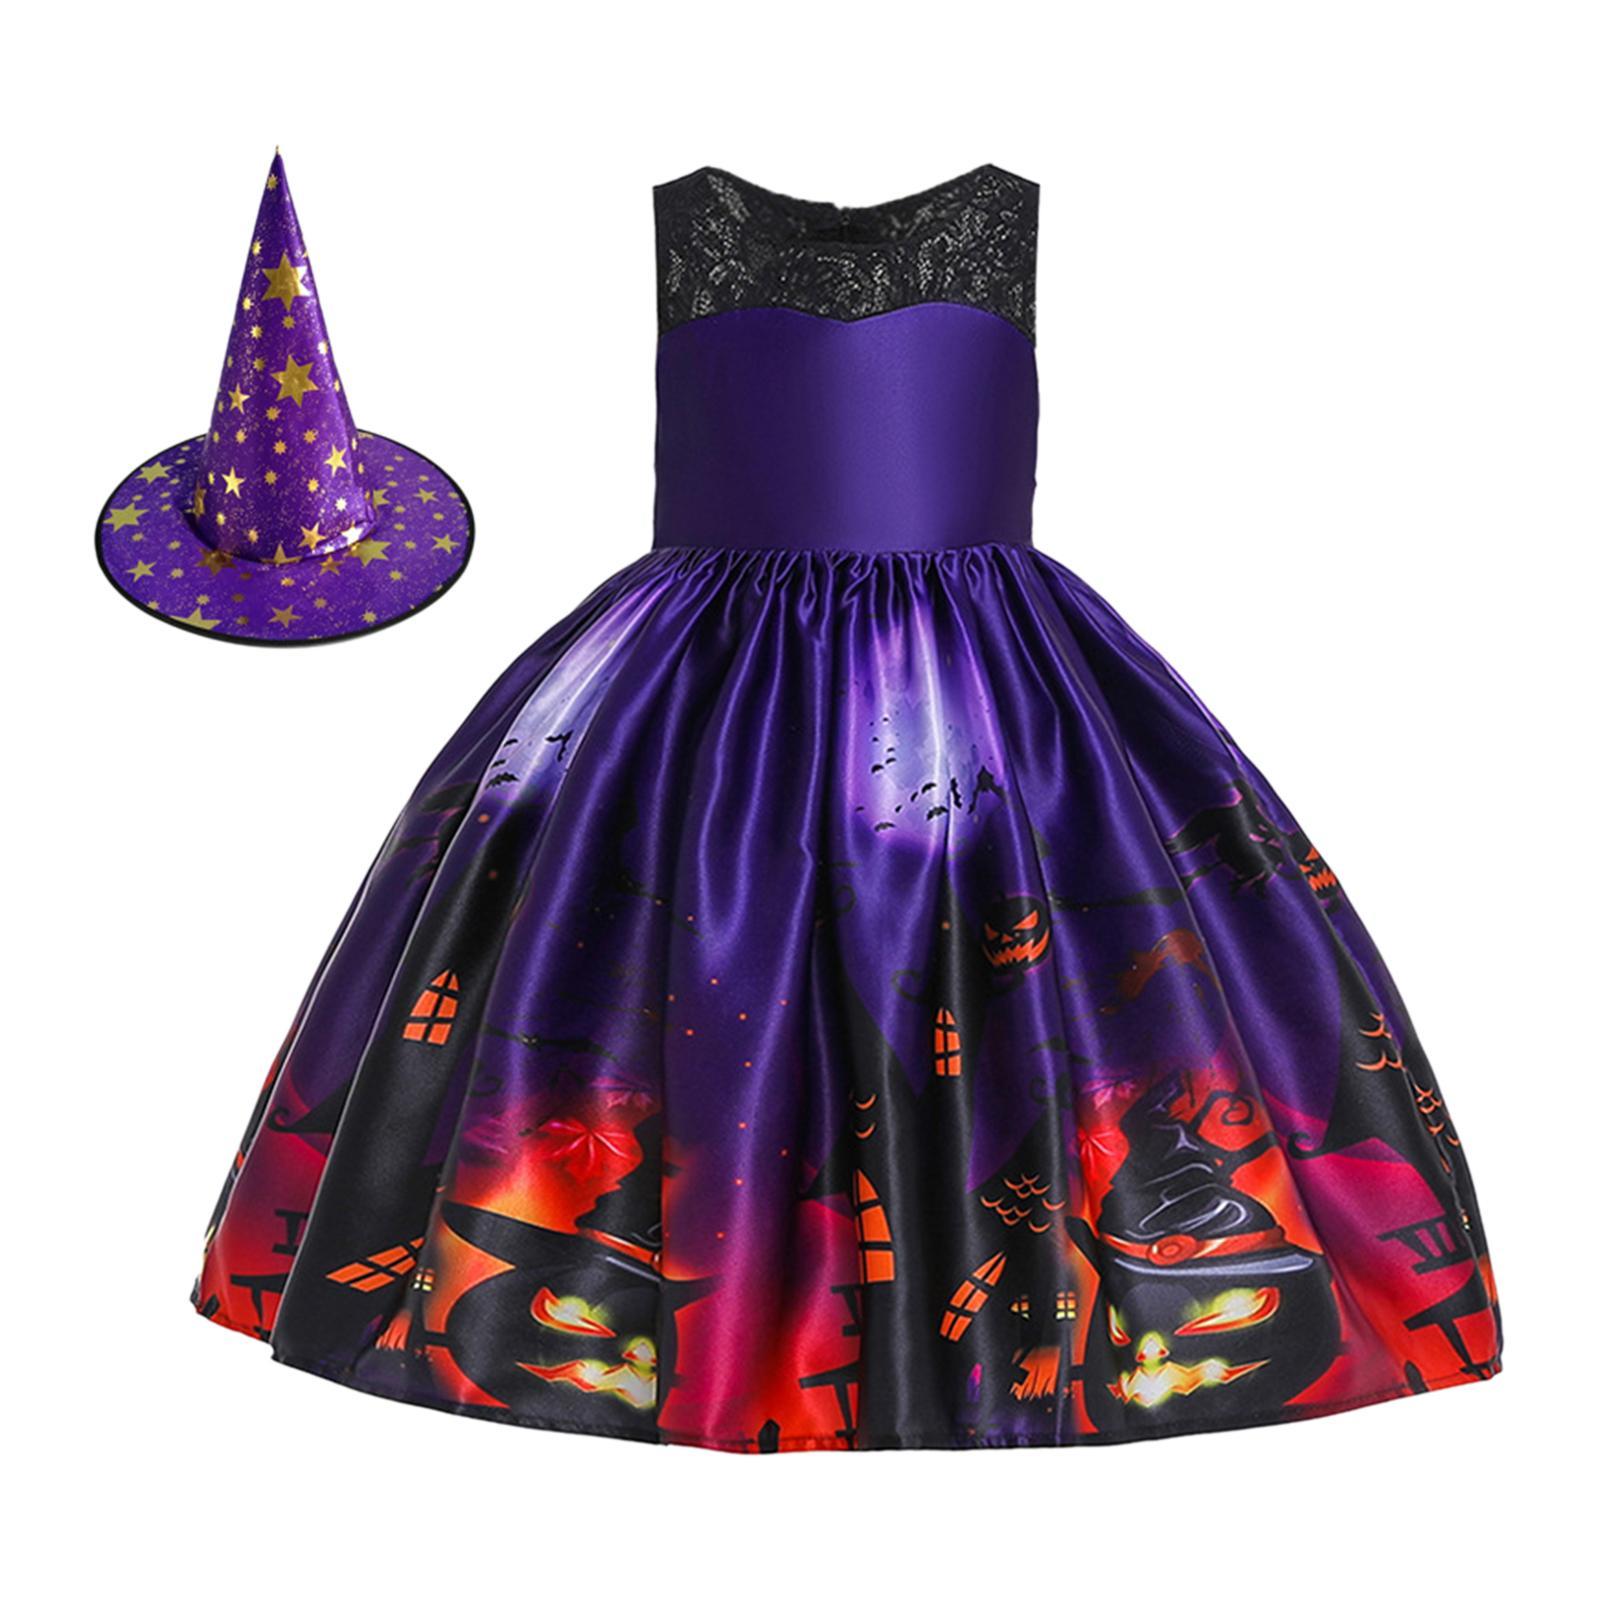 Girl Witch Halloween Costume Dress Fancy Dress Cosplay Festival Party Outfit